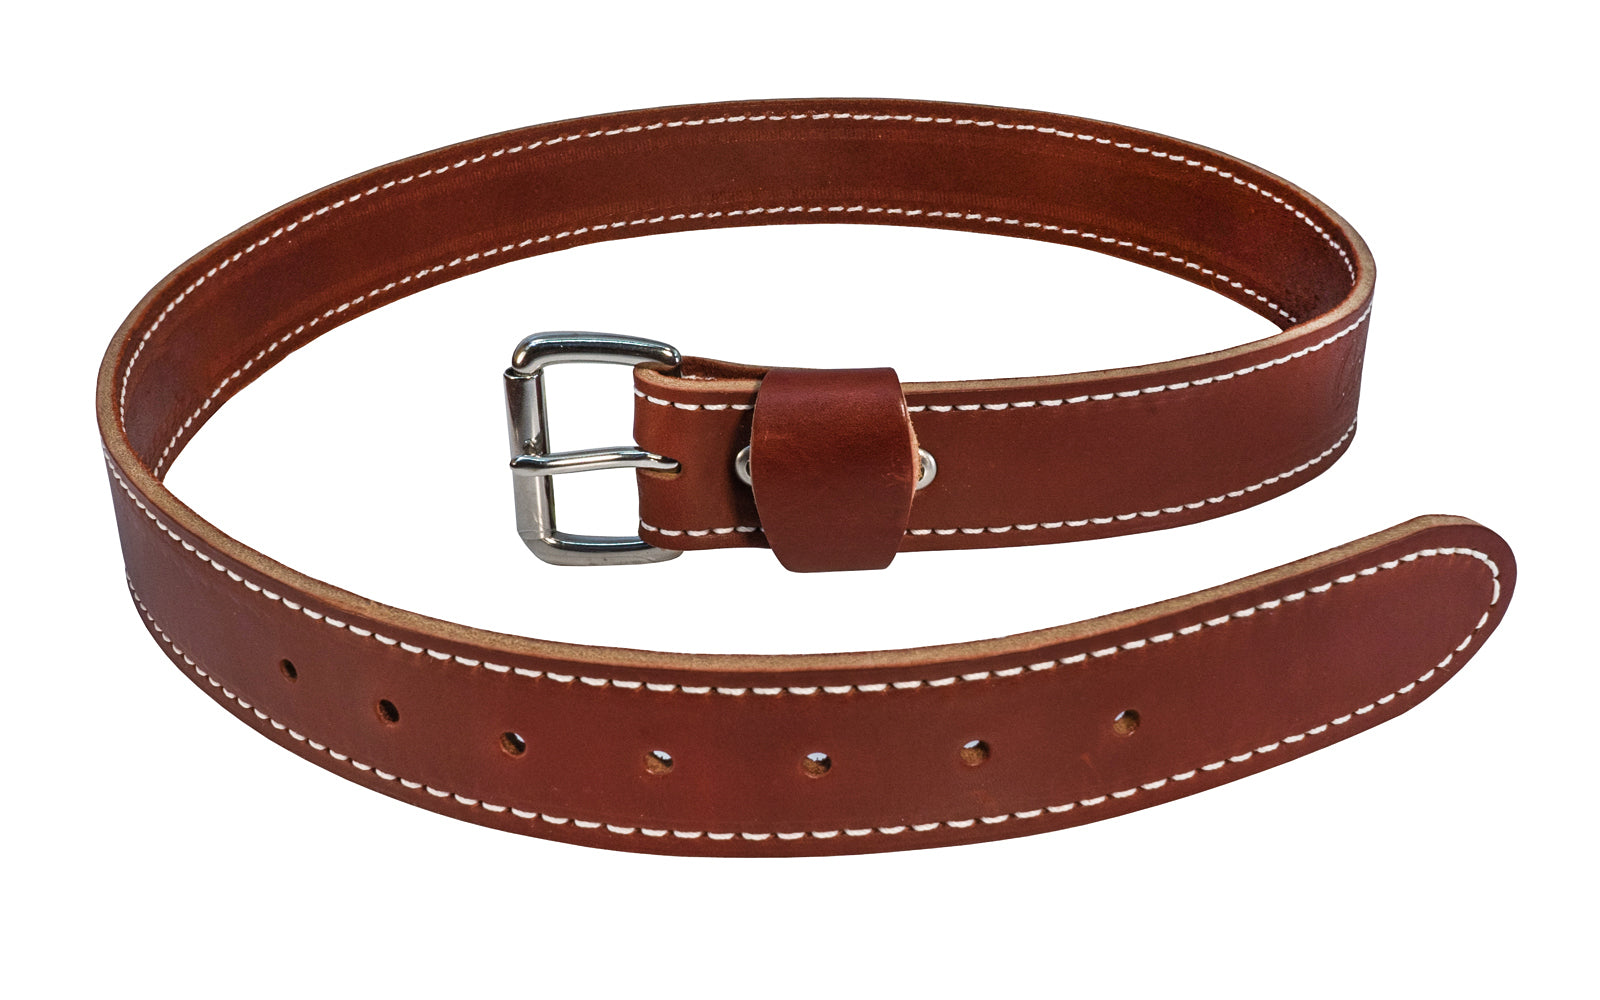 Occidental Leather Small 1-1/2" Leather Working Man's Belt ~ Model 5008S - Made of genuine leather - Made in USA  - 759244191400 - Small Occidental Belt - Leather Work Belt - 1-1/2" wide - Large Buckle - Quality bridle leather - Edge stitched for quality, appearance & strength - 5008 S - Small 29-33" - 42" Length